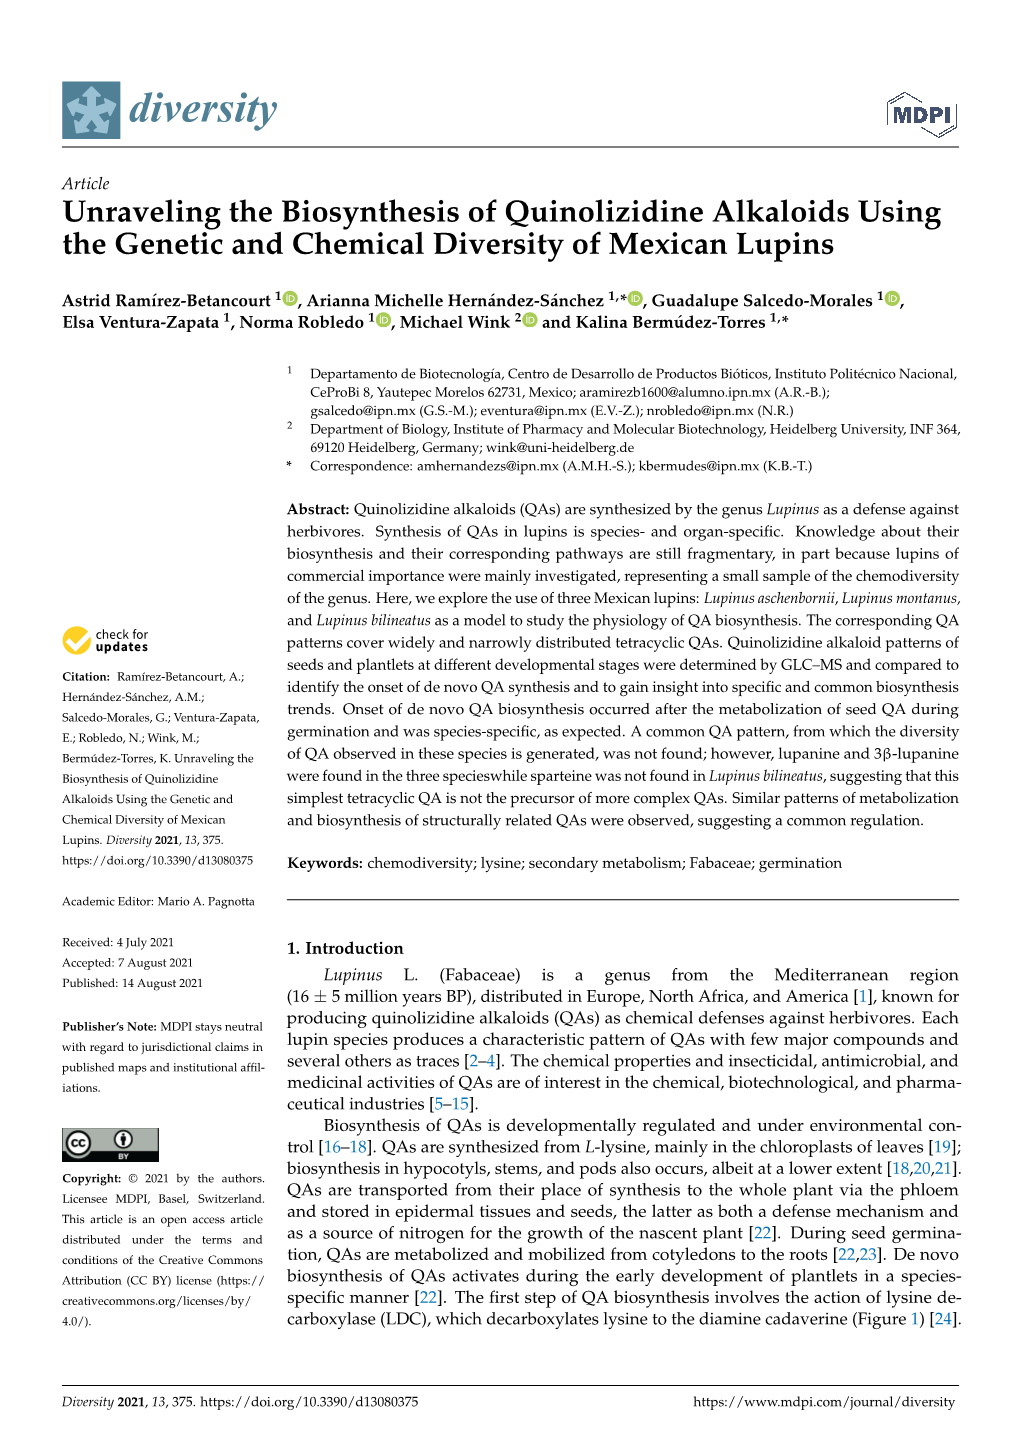 Unraveling the Biosynthesis of Quinolizidine Alkaloids Using the Genetic and Chemical Diversity of Mexican Lupins